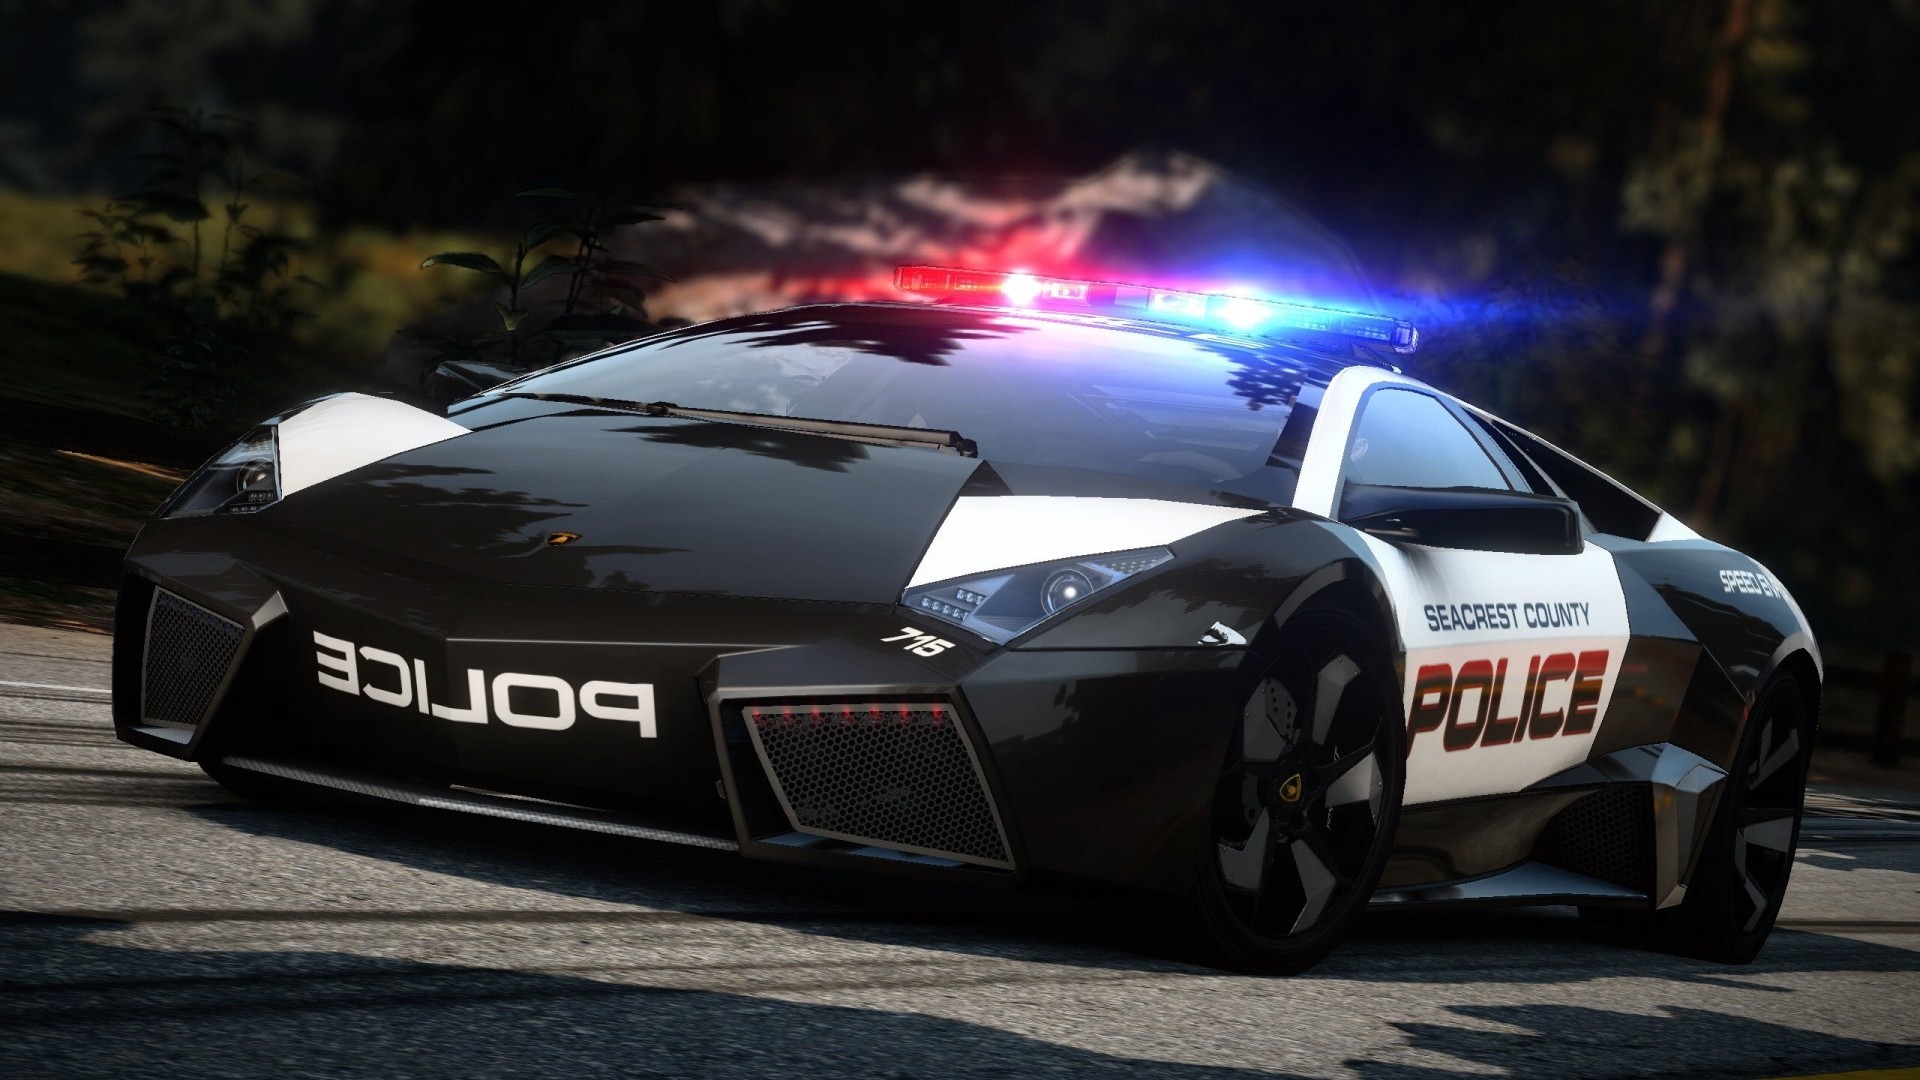 1920x1080  Wallpaper nfs, need for speed, police, car, road